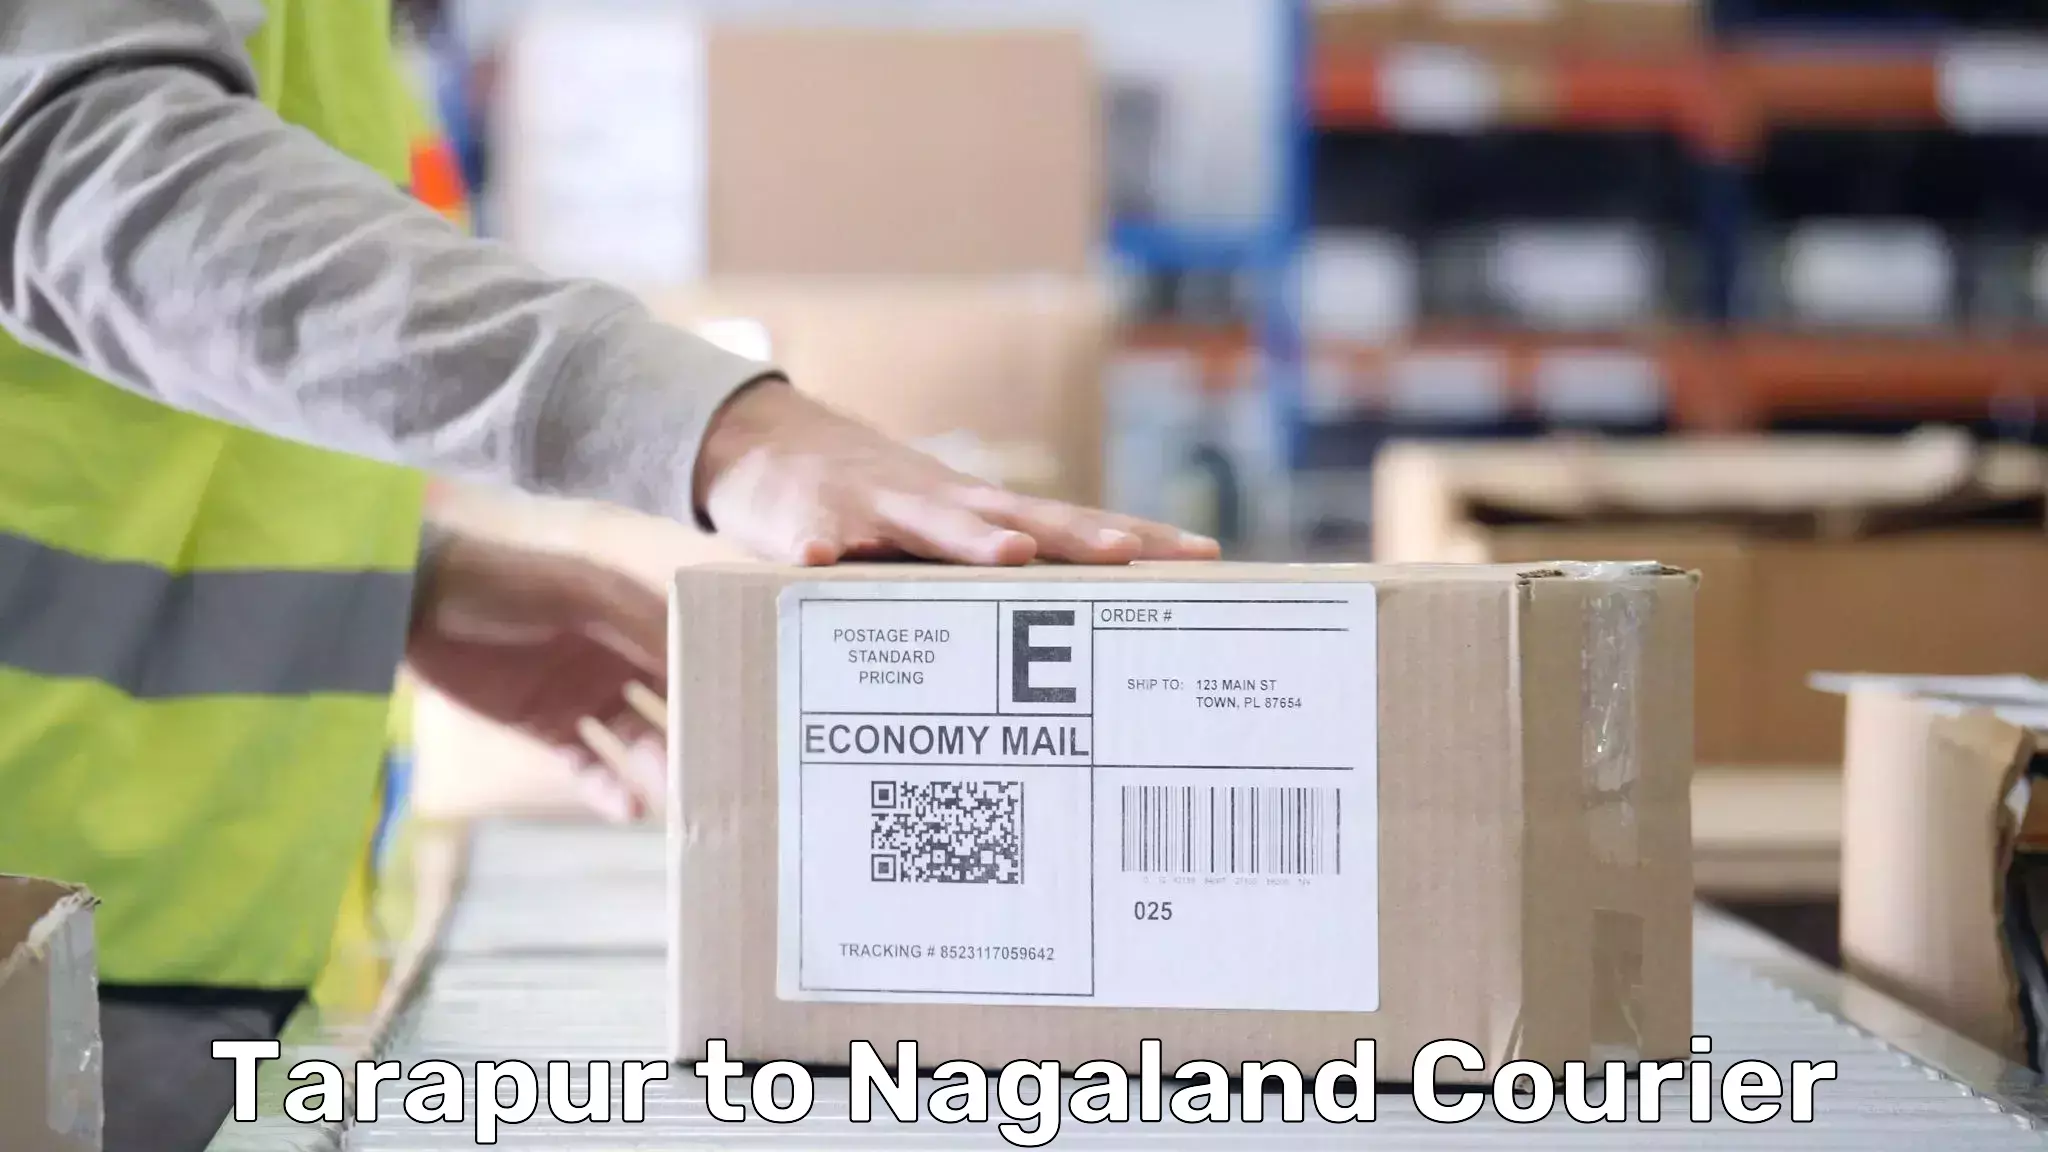 Luggage delivery providers Tarapur to Nagaland